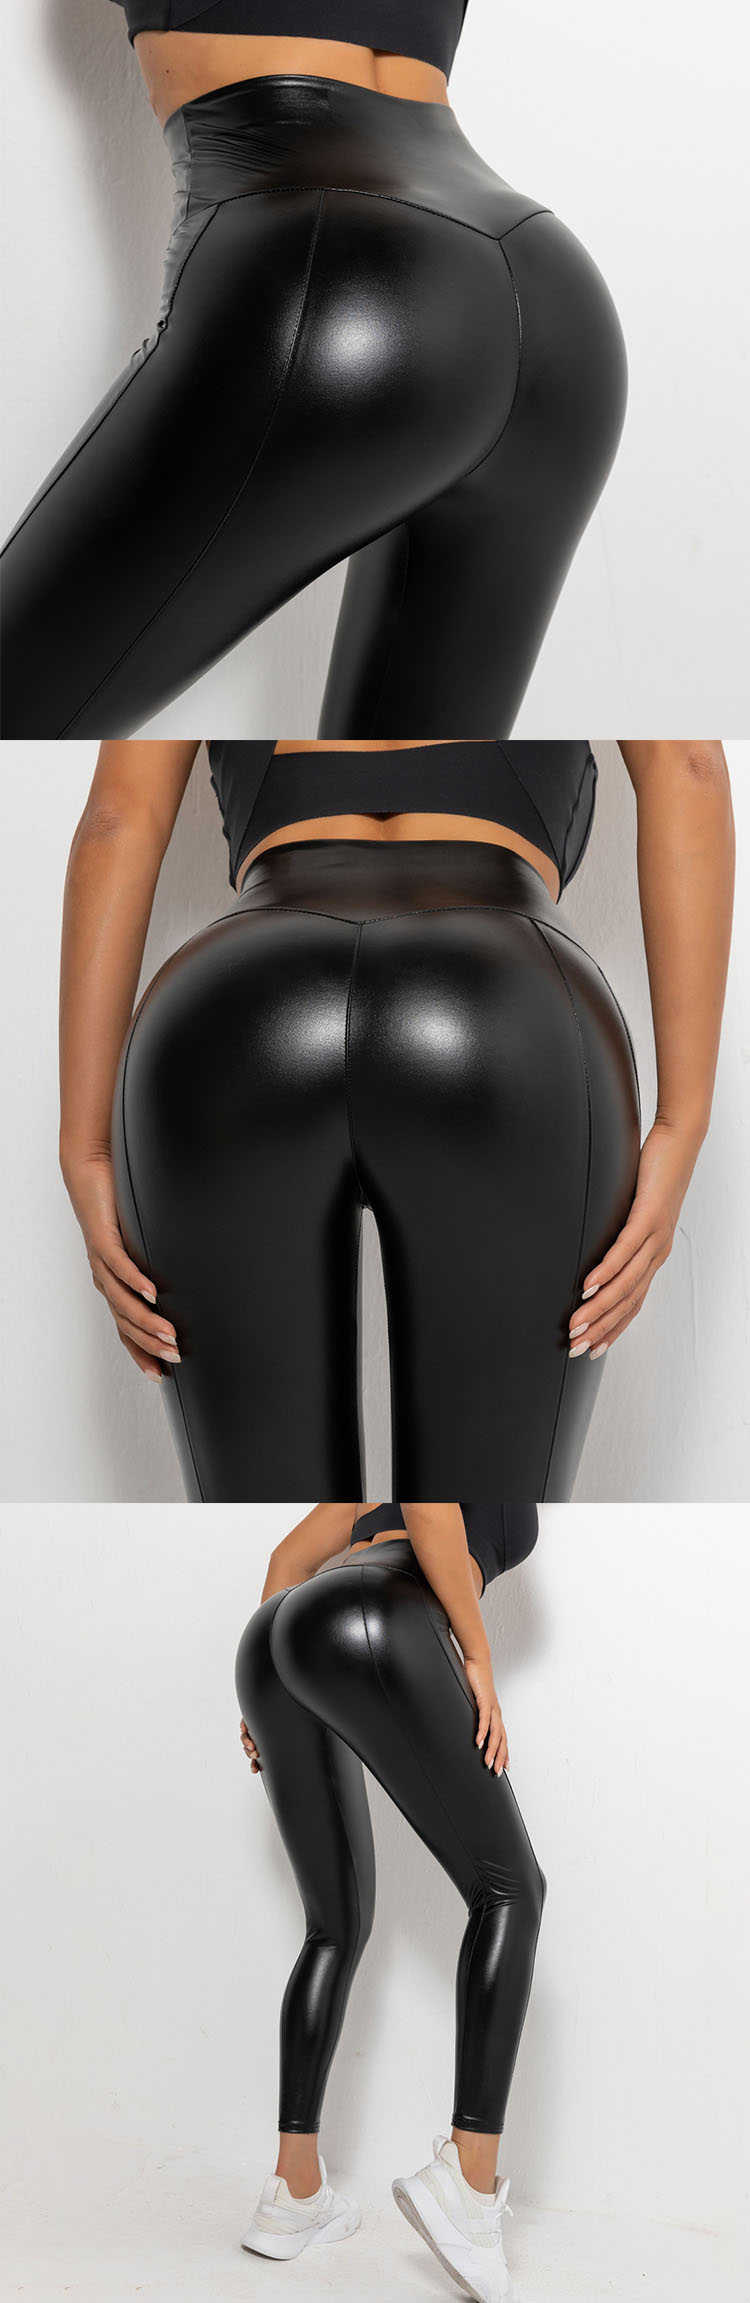 Slim cut is adopted to wrap the buttocks and show a sexy figure